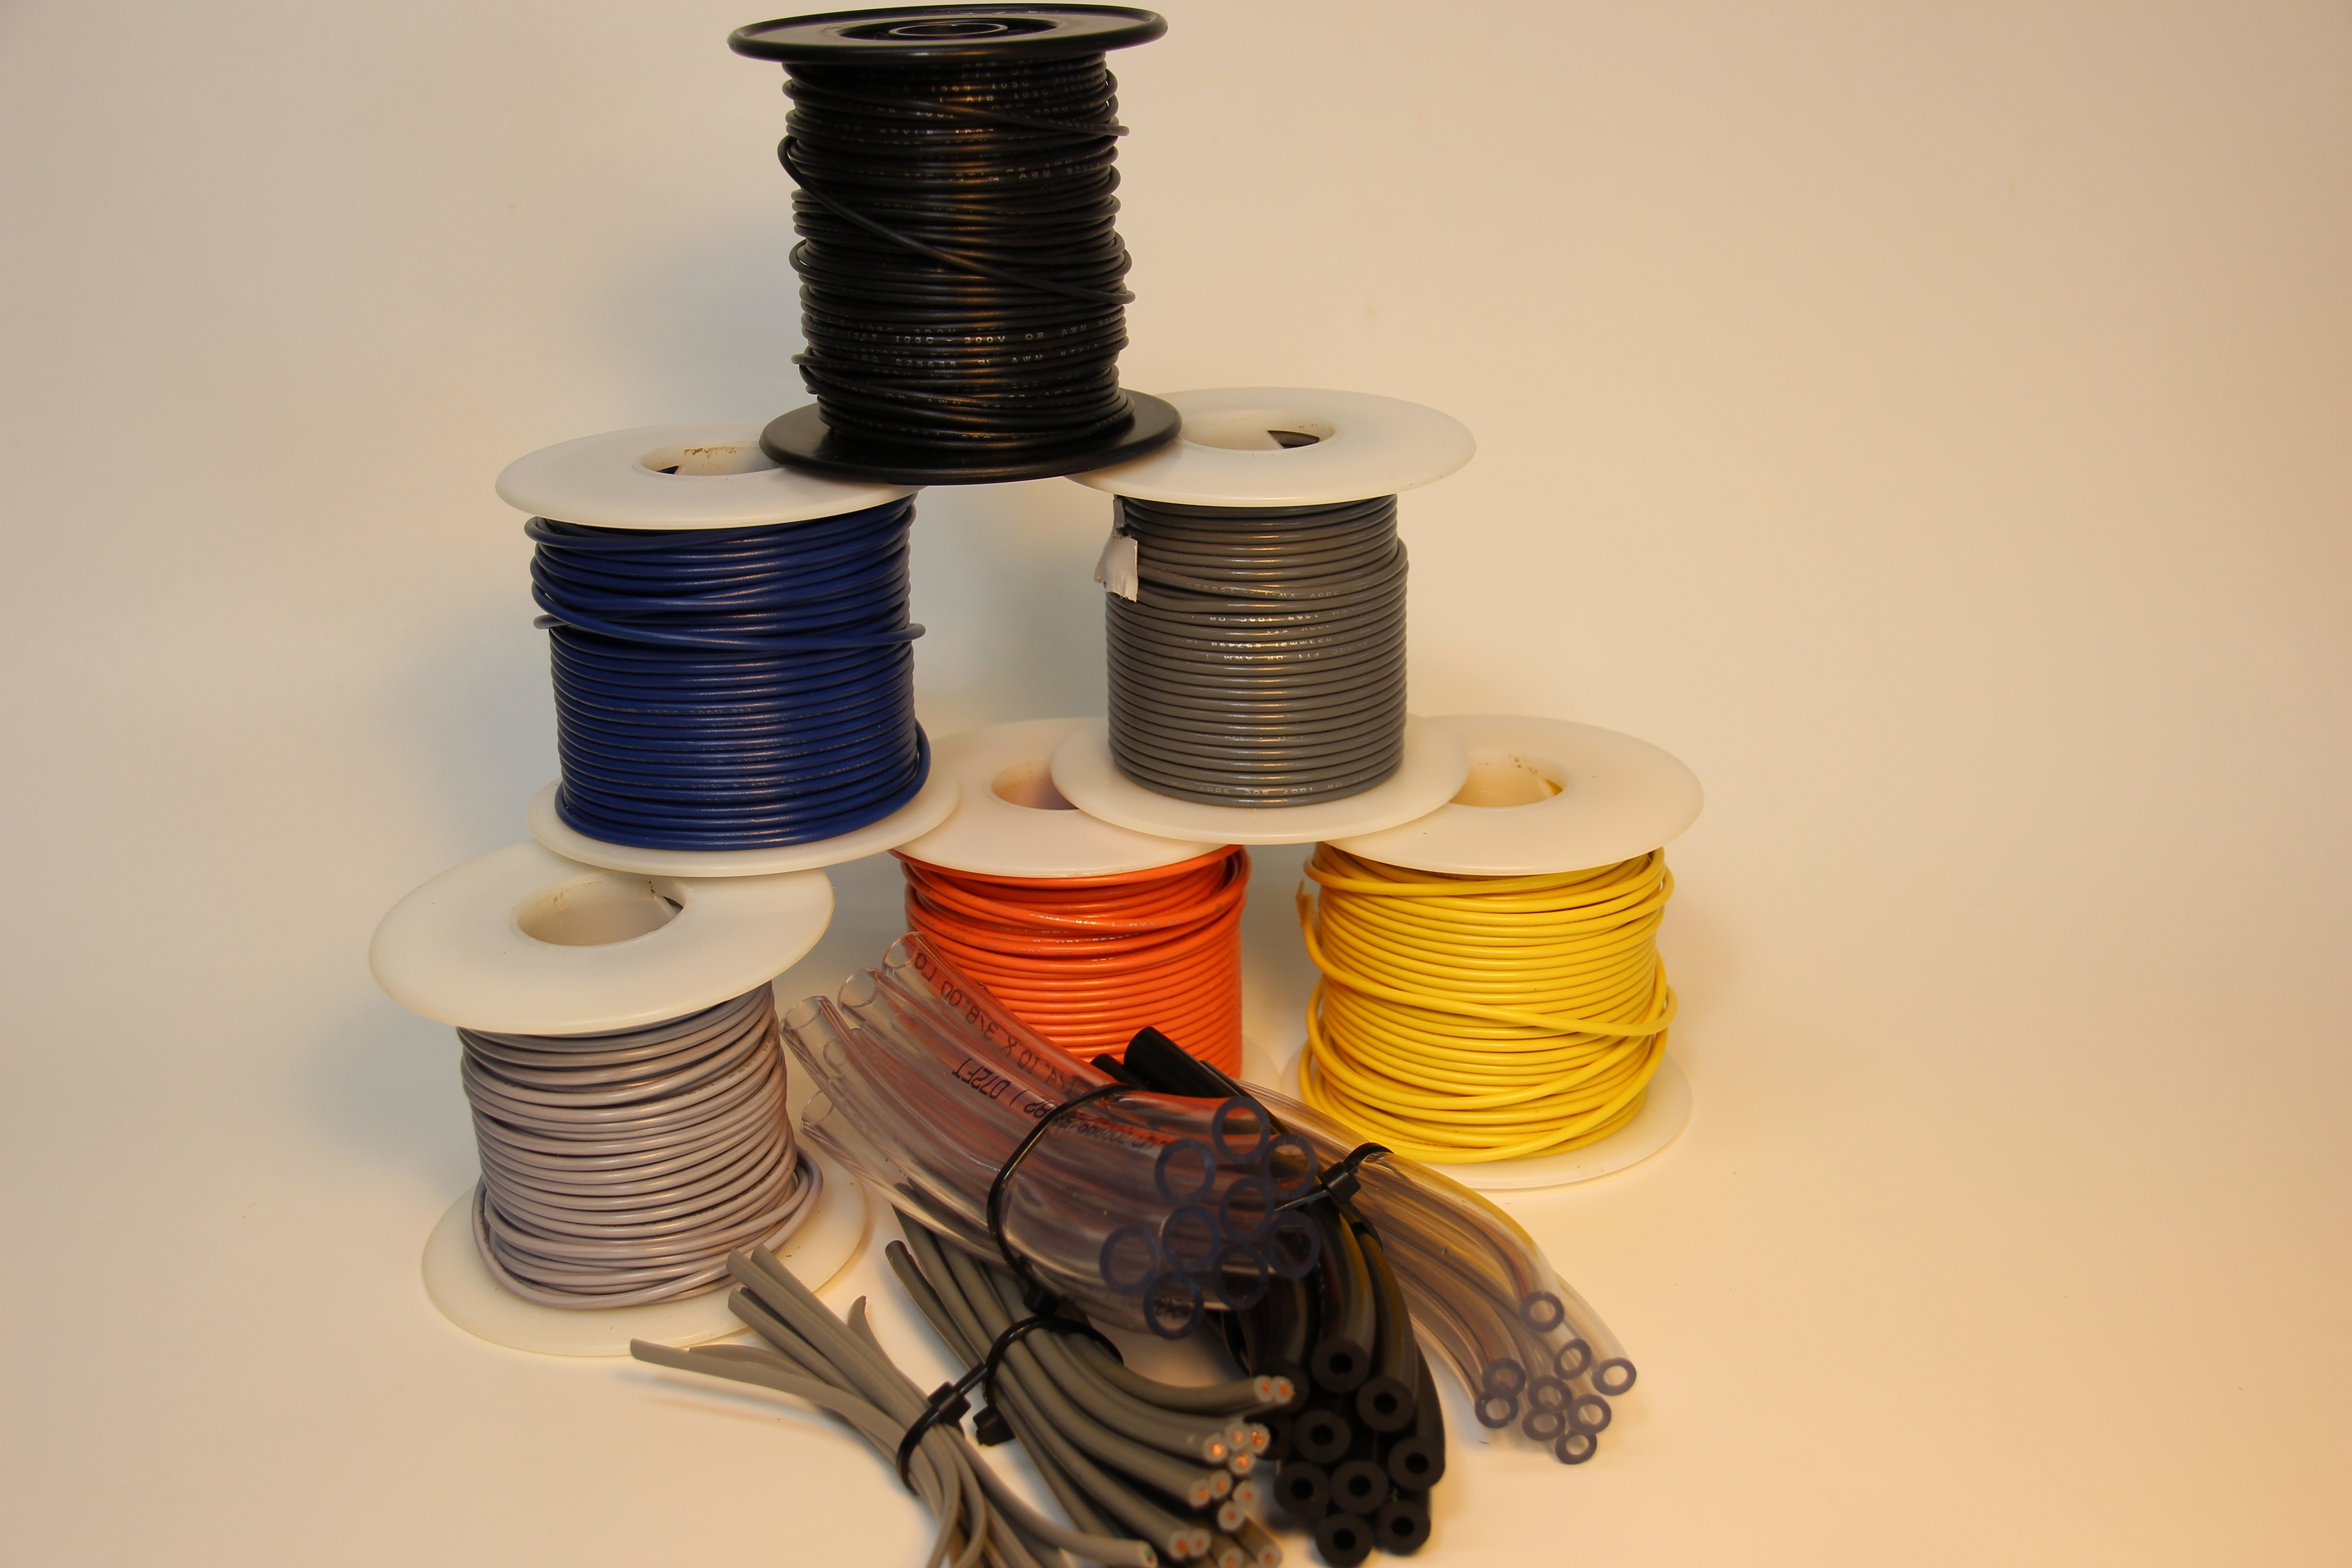 Spools of Wire and bundles cut of cable and tubing